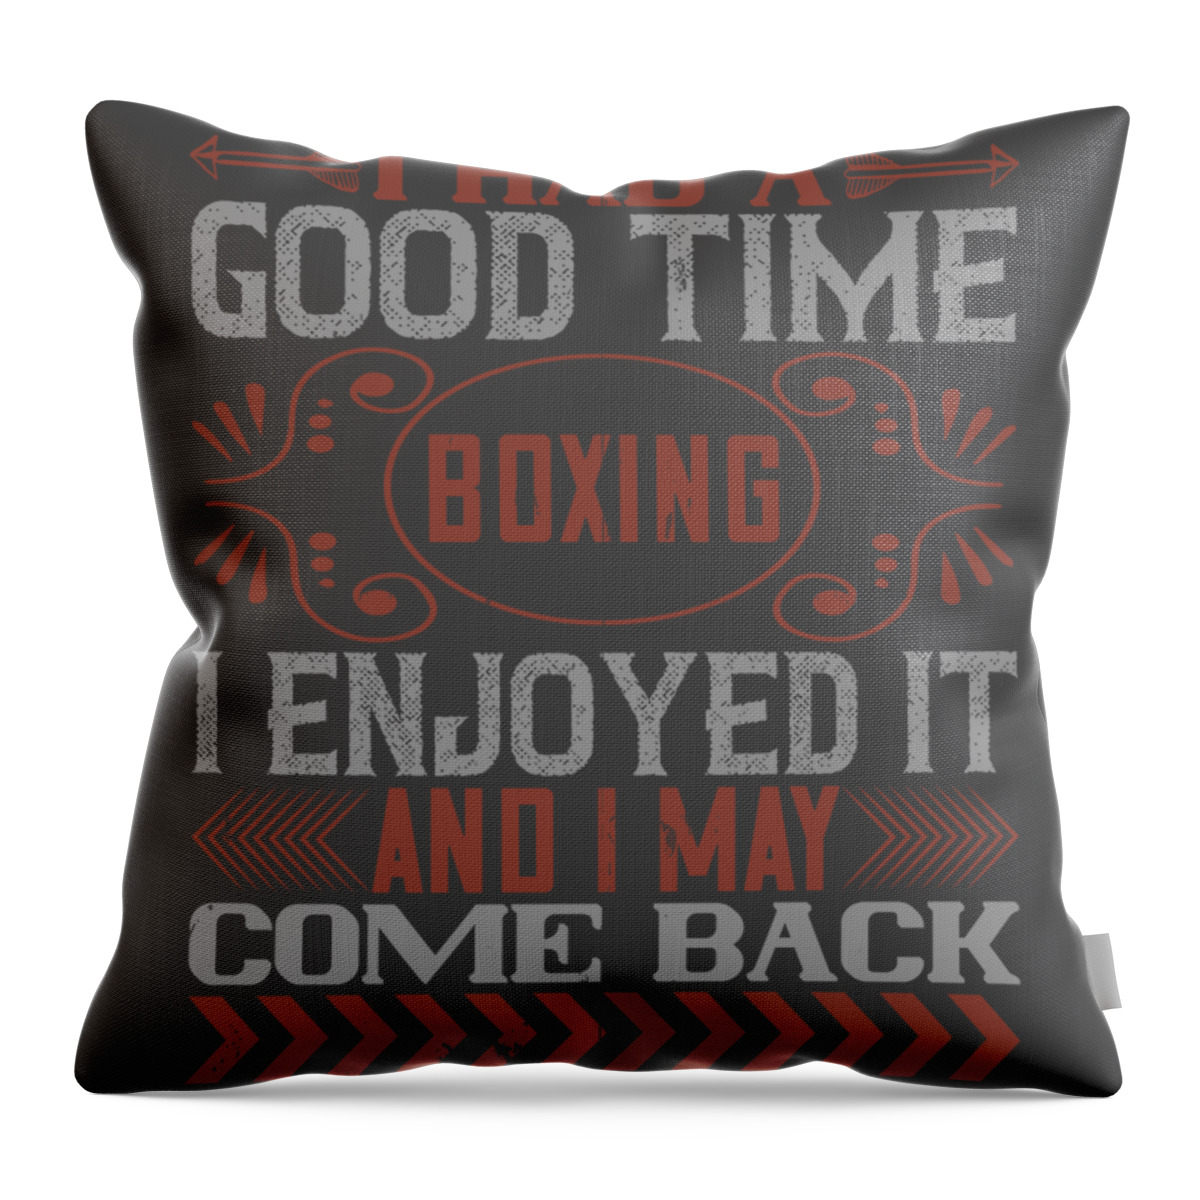 Boxing Throw Pillow featuring the digital art Boxing Gift I Had A Good Time Boxing I Enjoyed It And I May Come Back by Jeff Creation